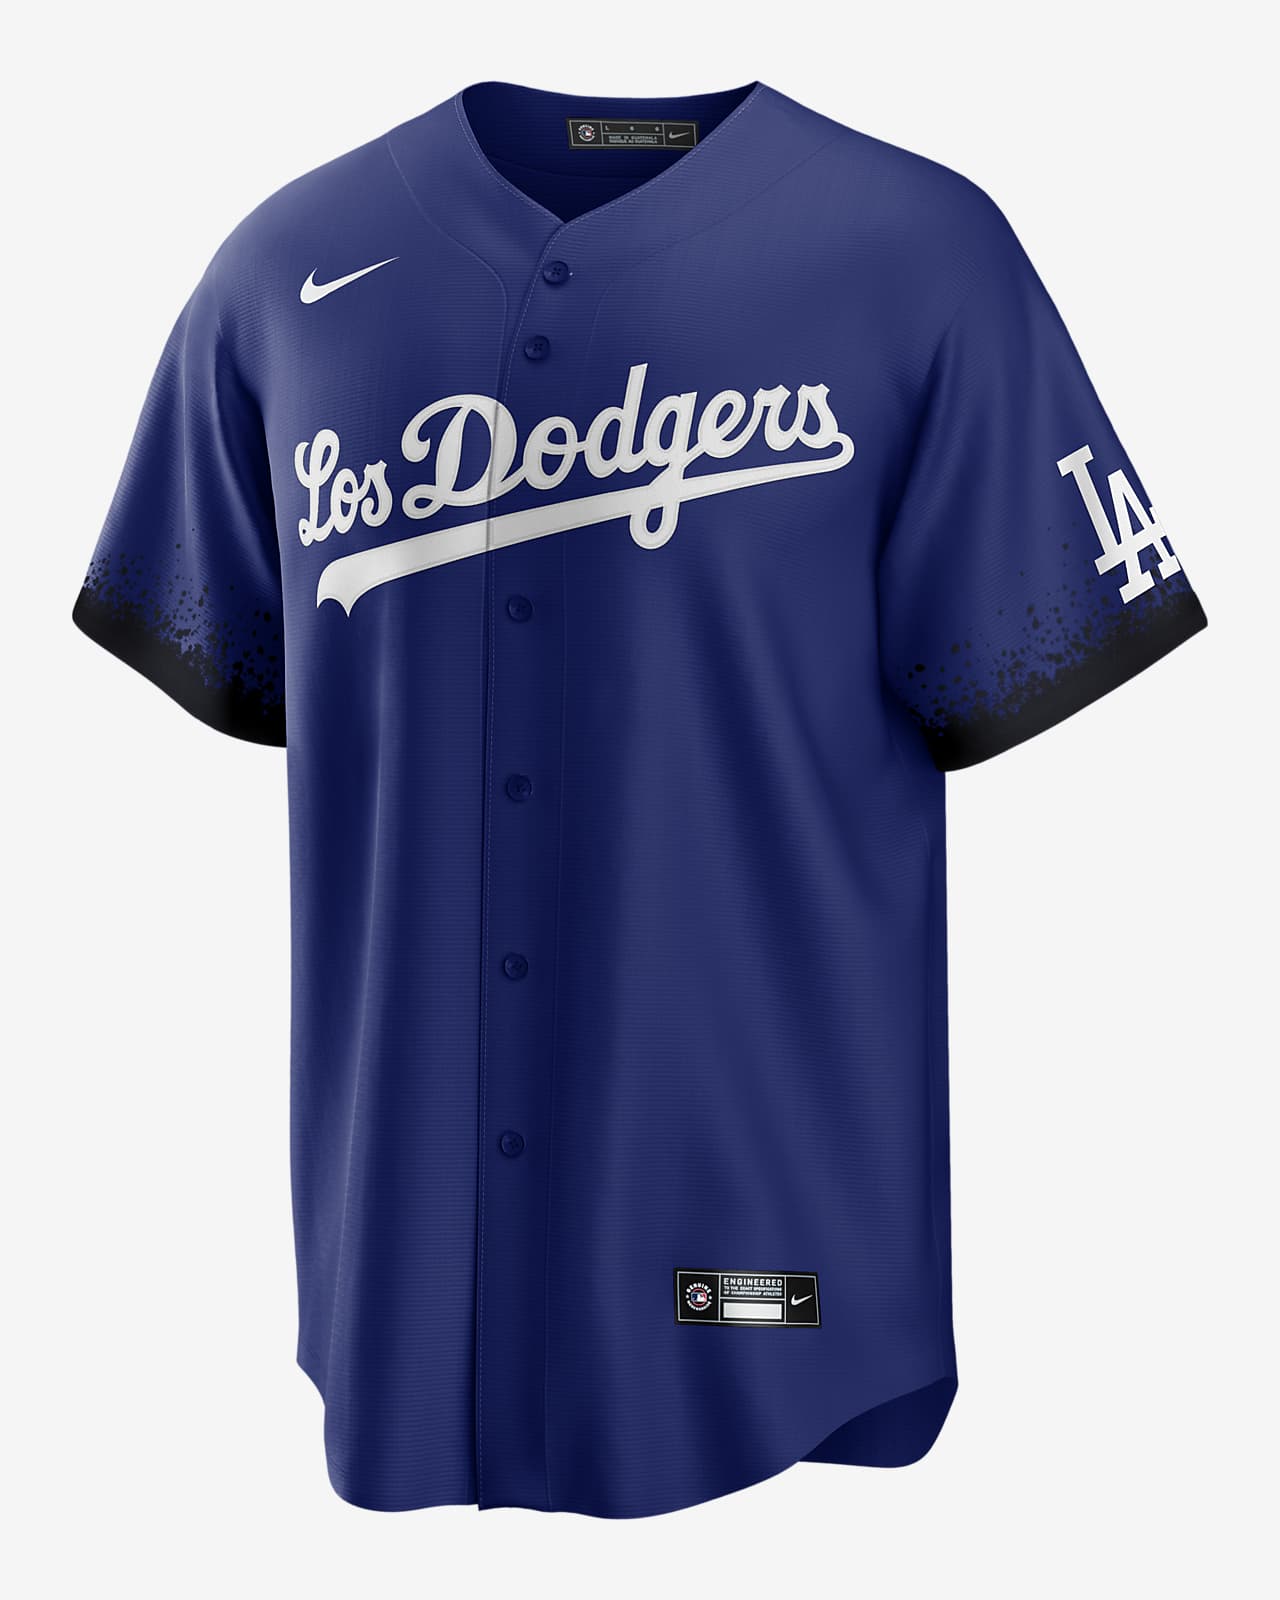 MLB Los Angeles Dodgers City Connect (Jackie Robinson) Men's Replica  Baseball Jersey